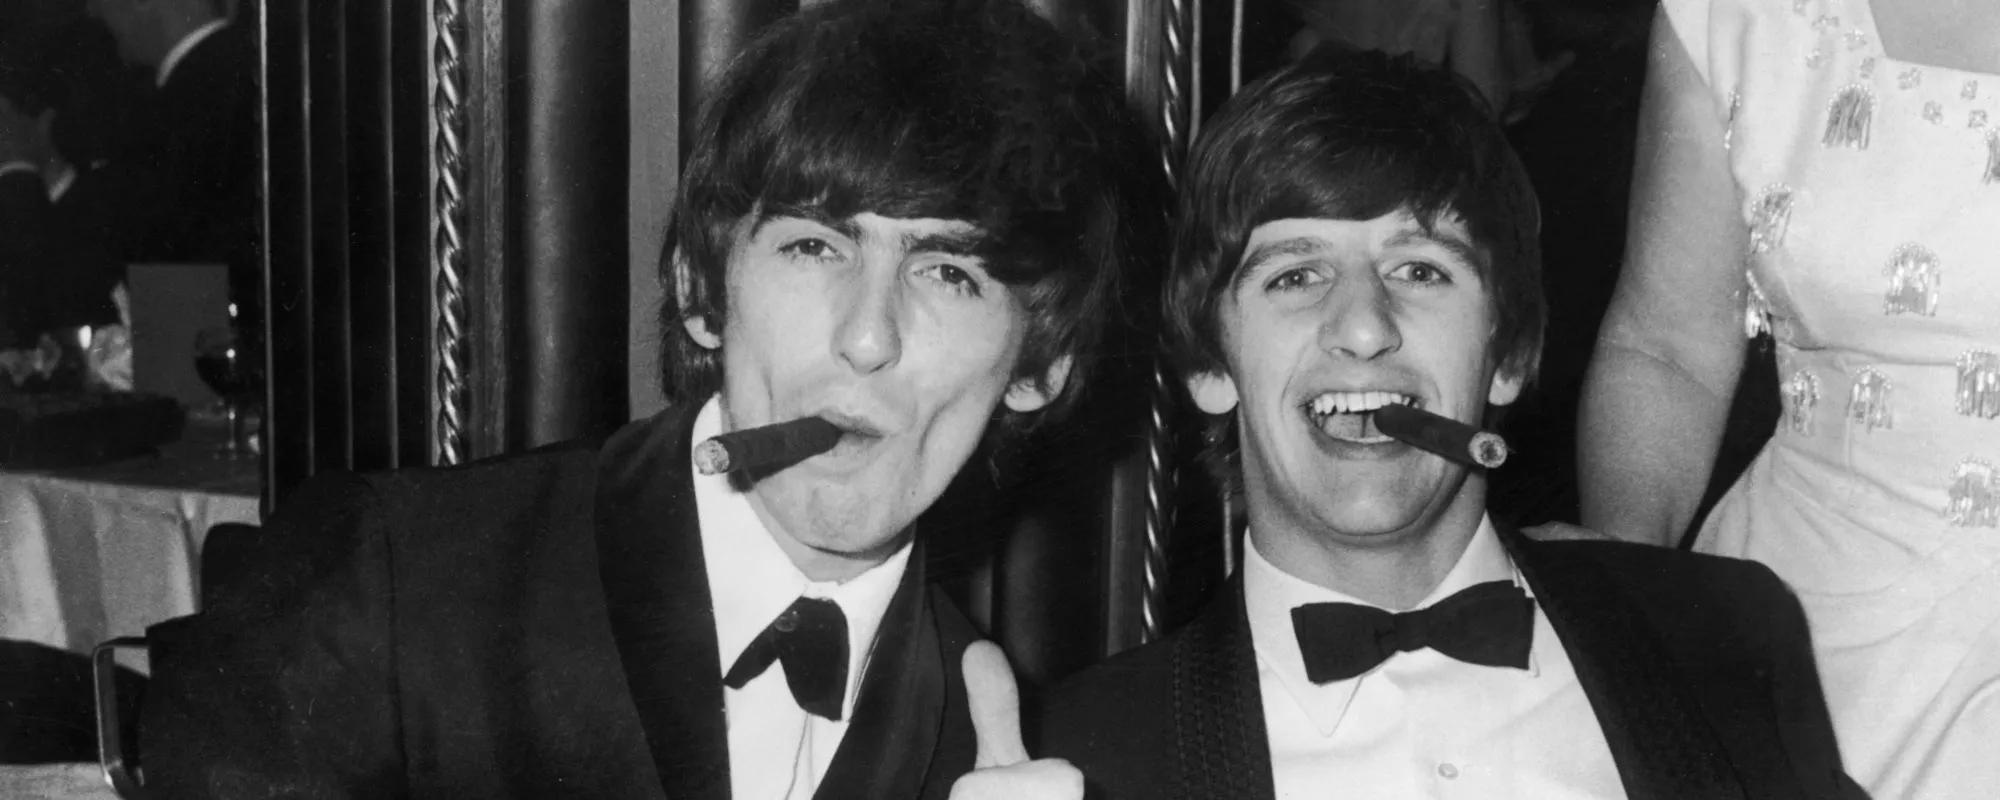 Rediscovering the Magic: George Harrison and Ringo Starr’s Imagined Collaboration in 2023